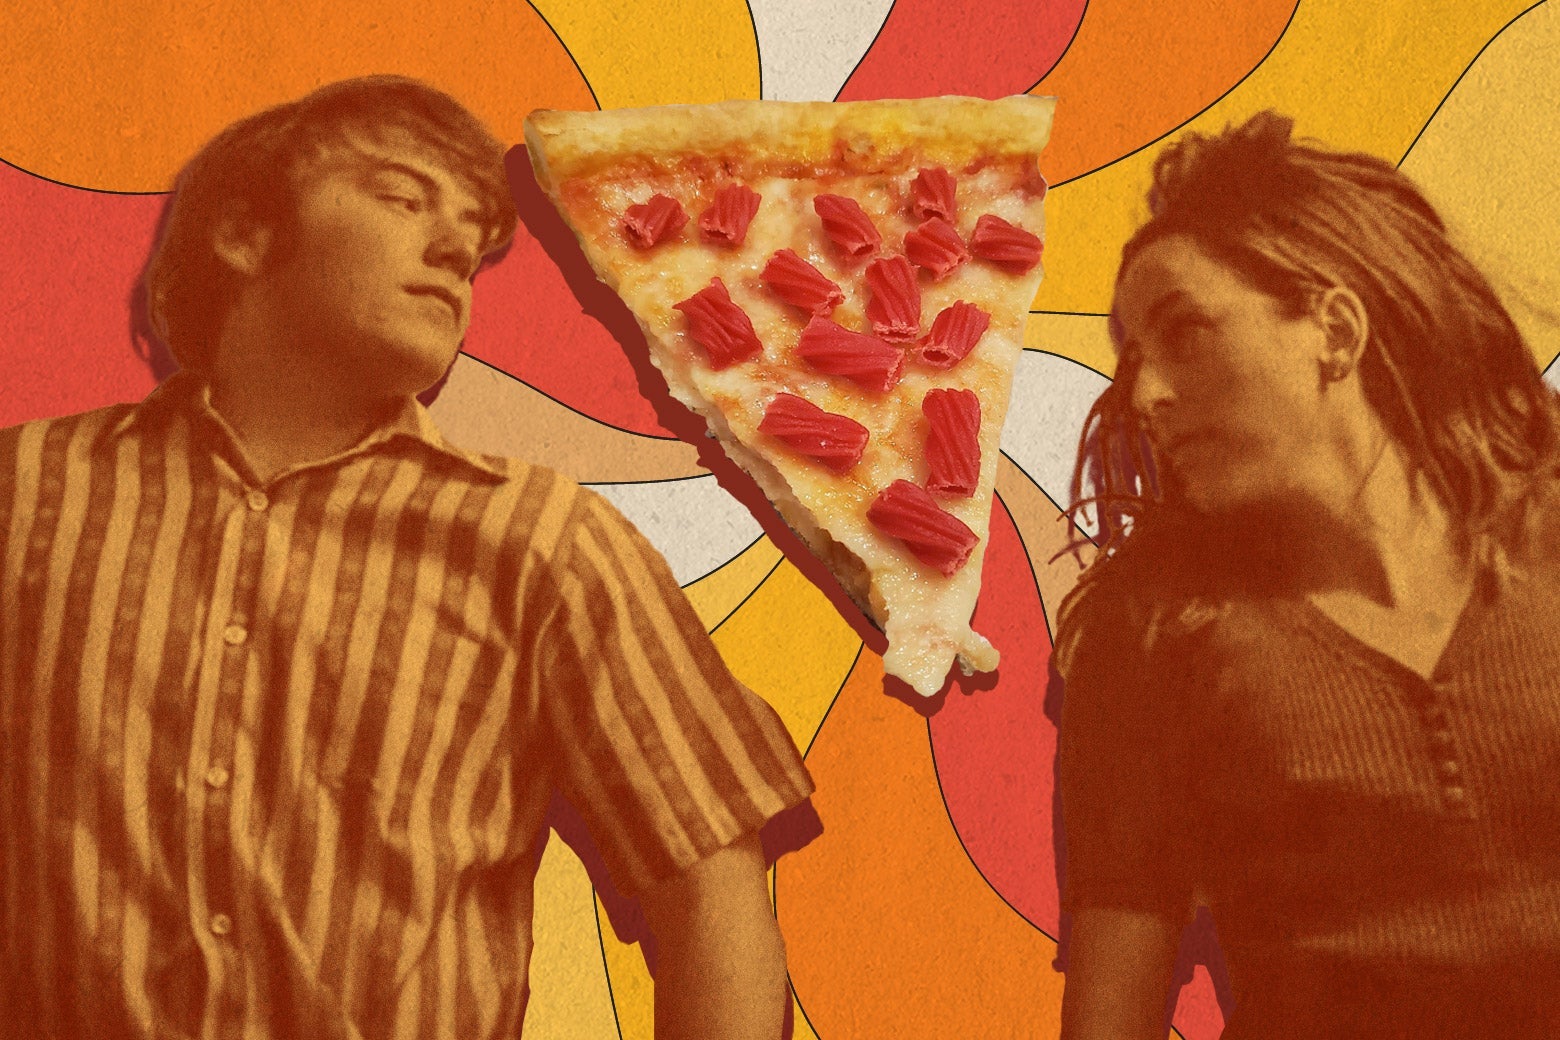 The characters from Licorice Pizza against a psychedelic background with a slice of pizza with red licorice on it between them.